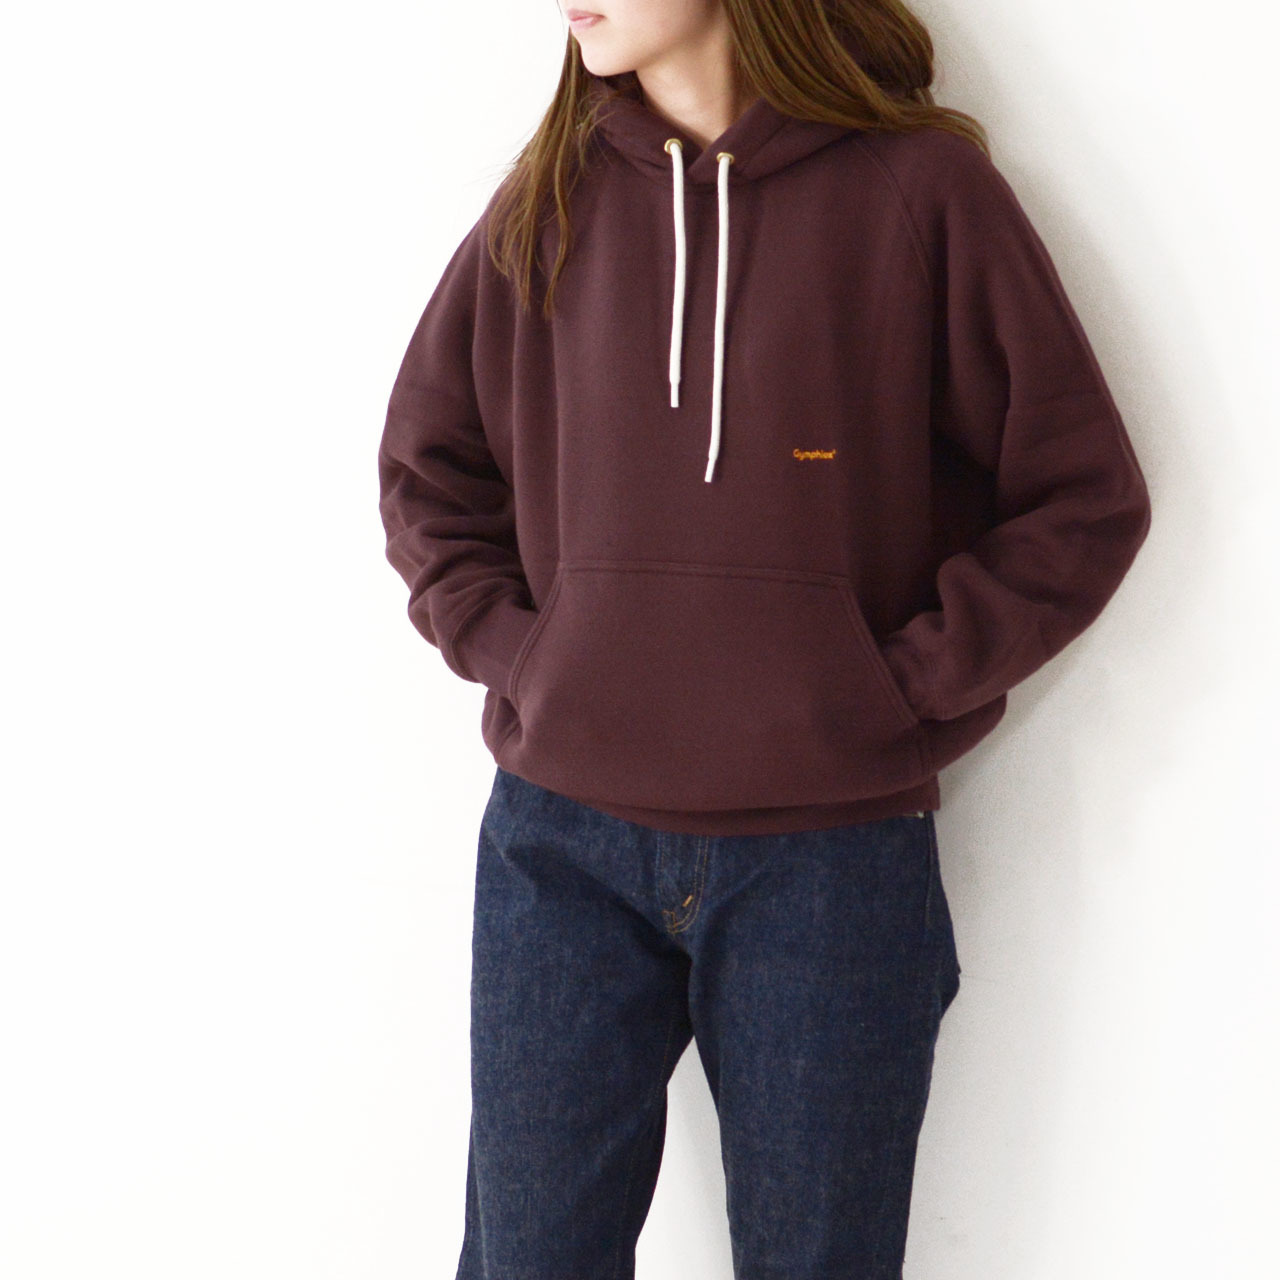 Gymphlex [ジムフレックス] SWING SLEEVE PULLOVER HOODIE [GY-C0002 ARB]_f0051306_13480001.jpg